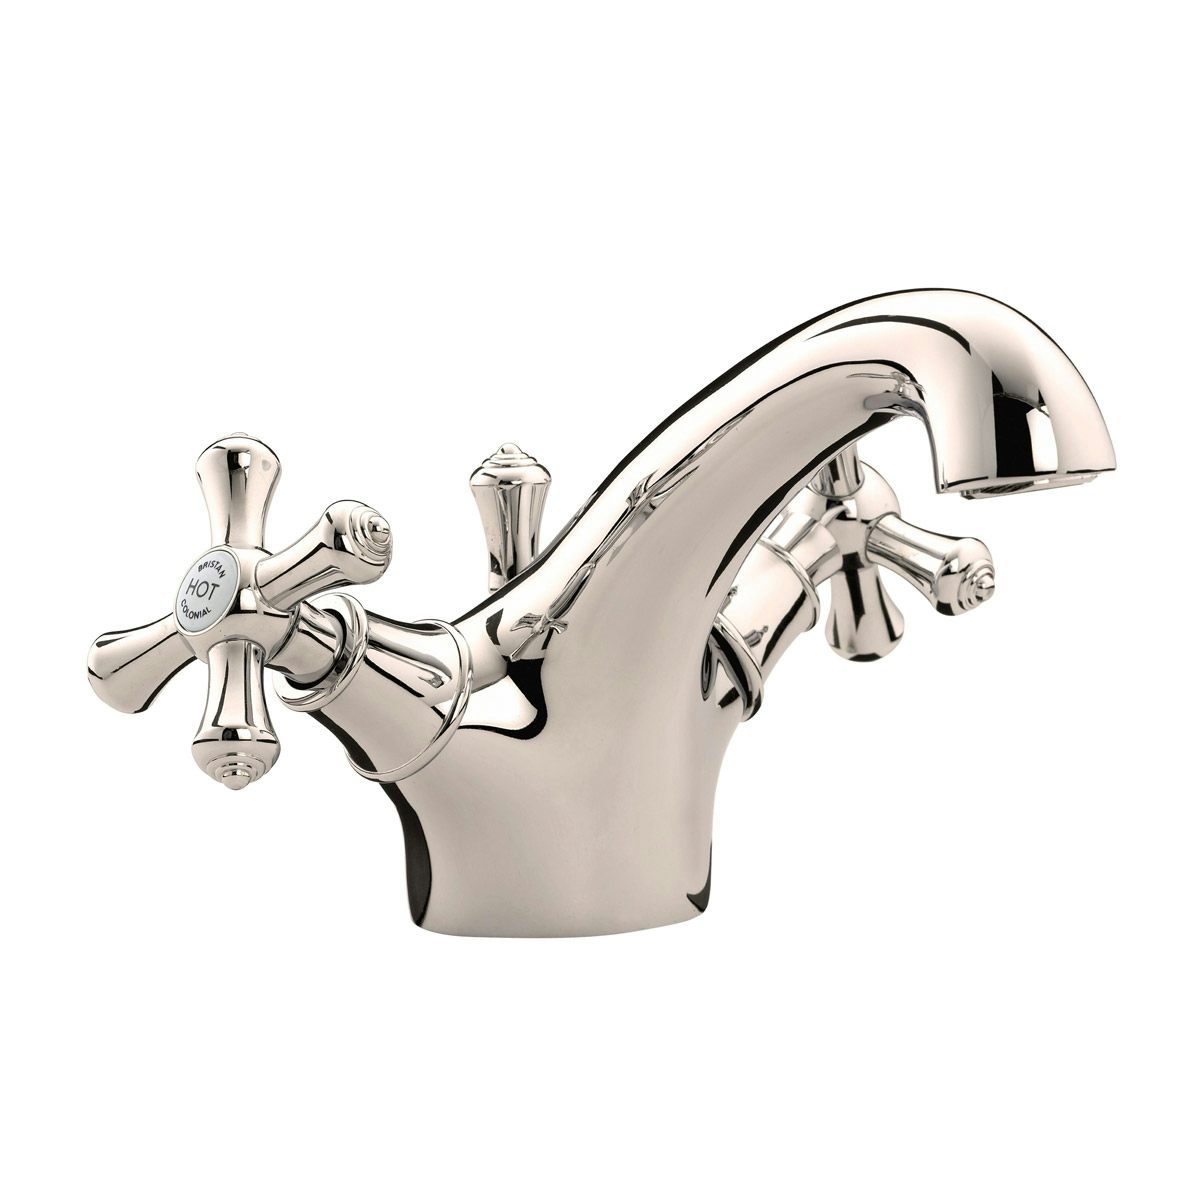 Bristan Colonial gold basin mixer tap with waste